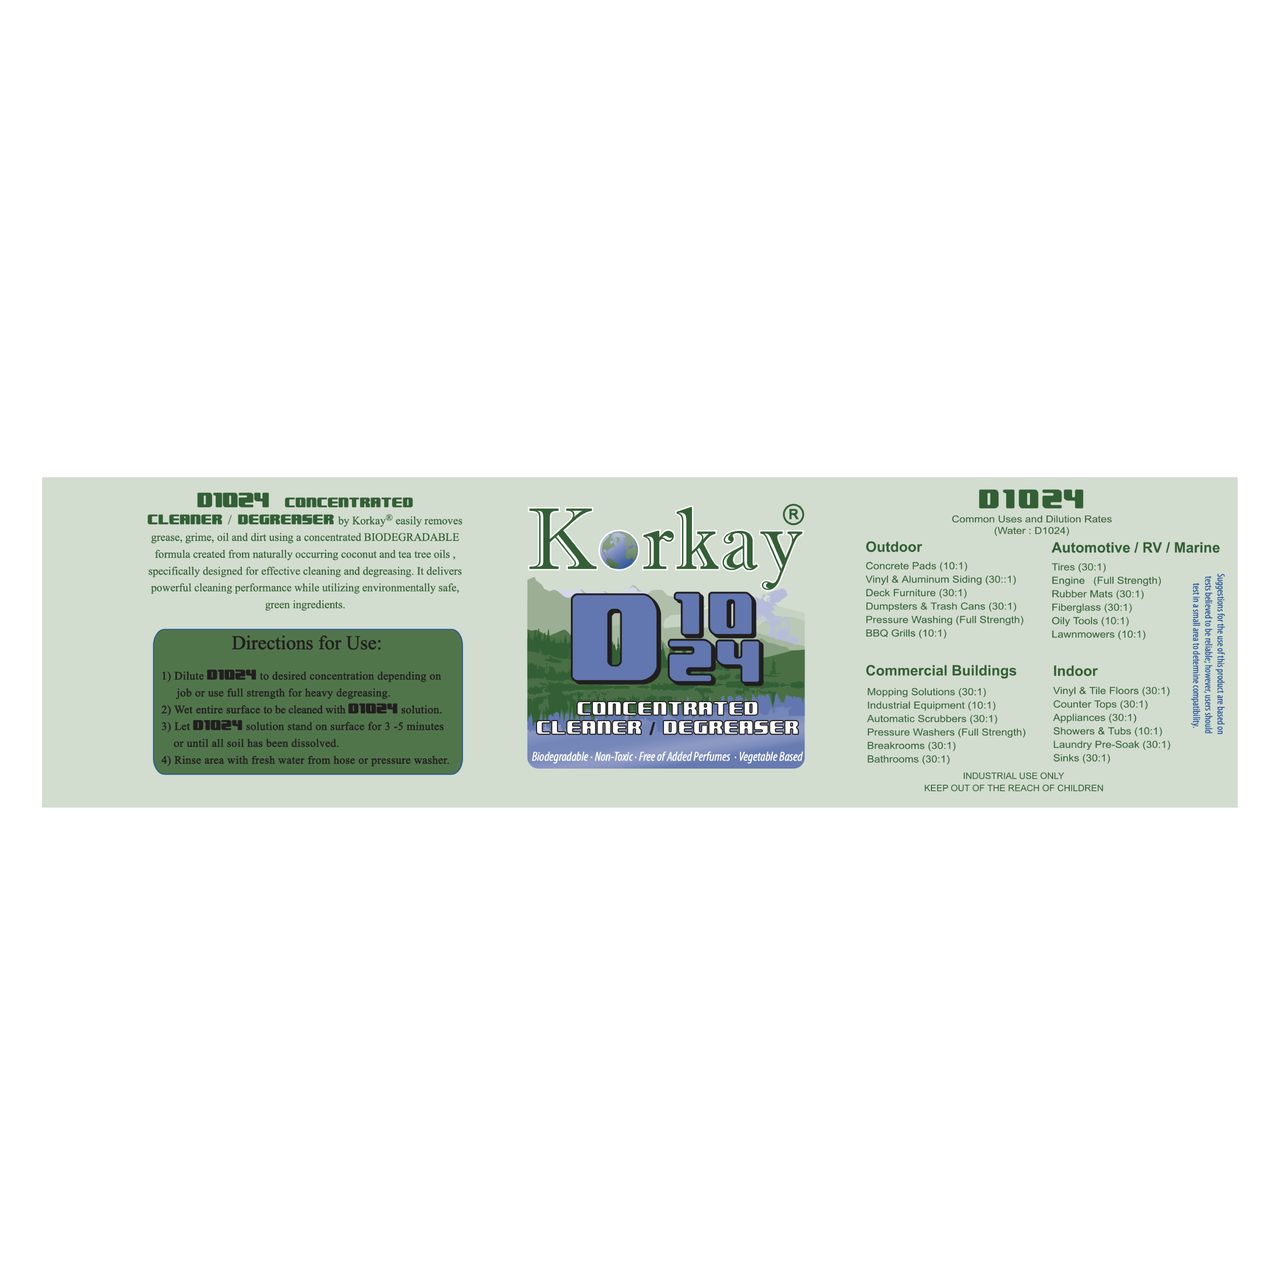 Korkay D1024 Concentrated Degreaser